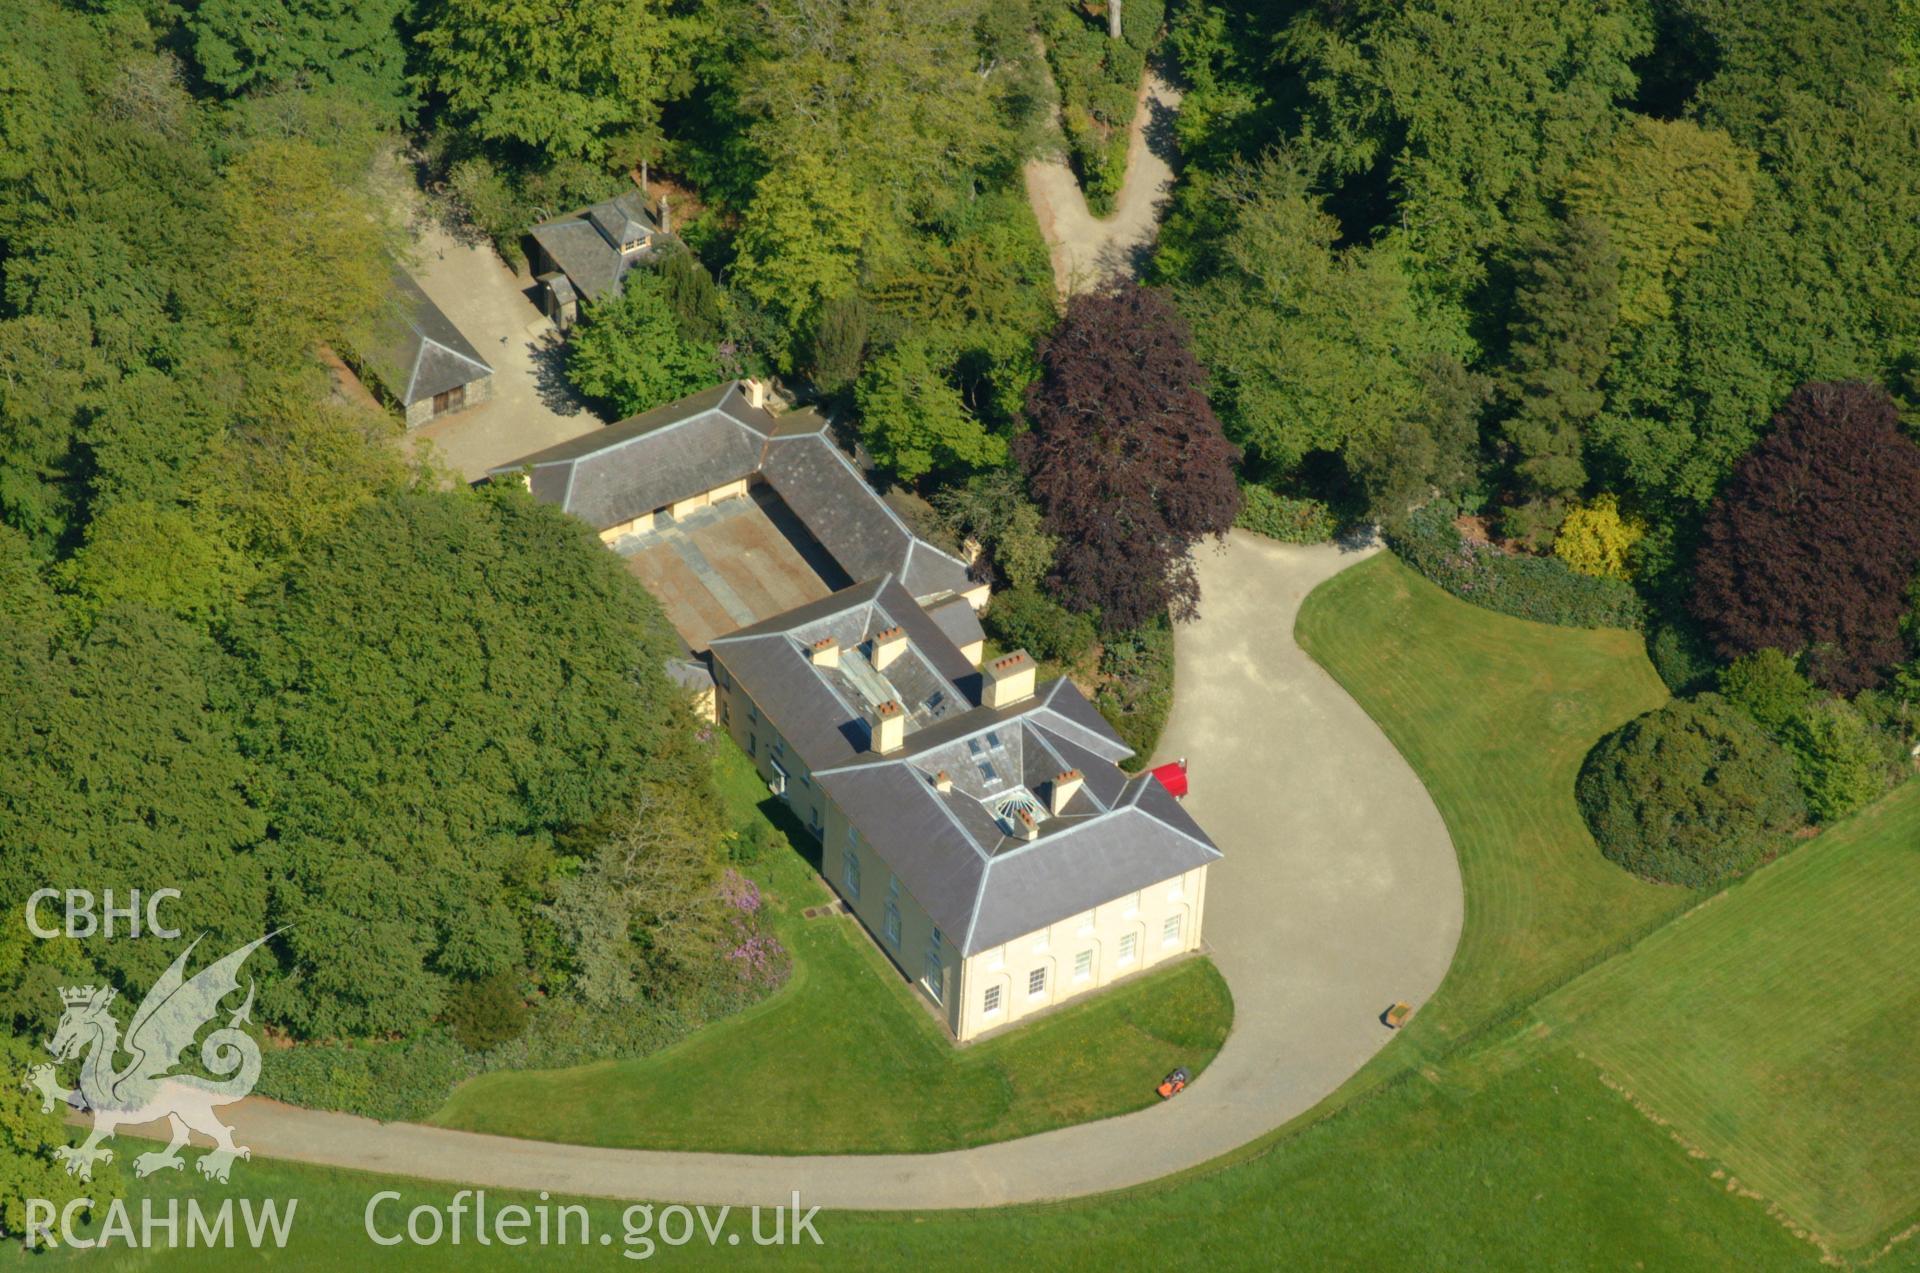 RCAHMW colour oblique aerial photograph of Llannerchaeron House taken on 24/05/2004 by Toby Driver